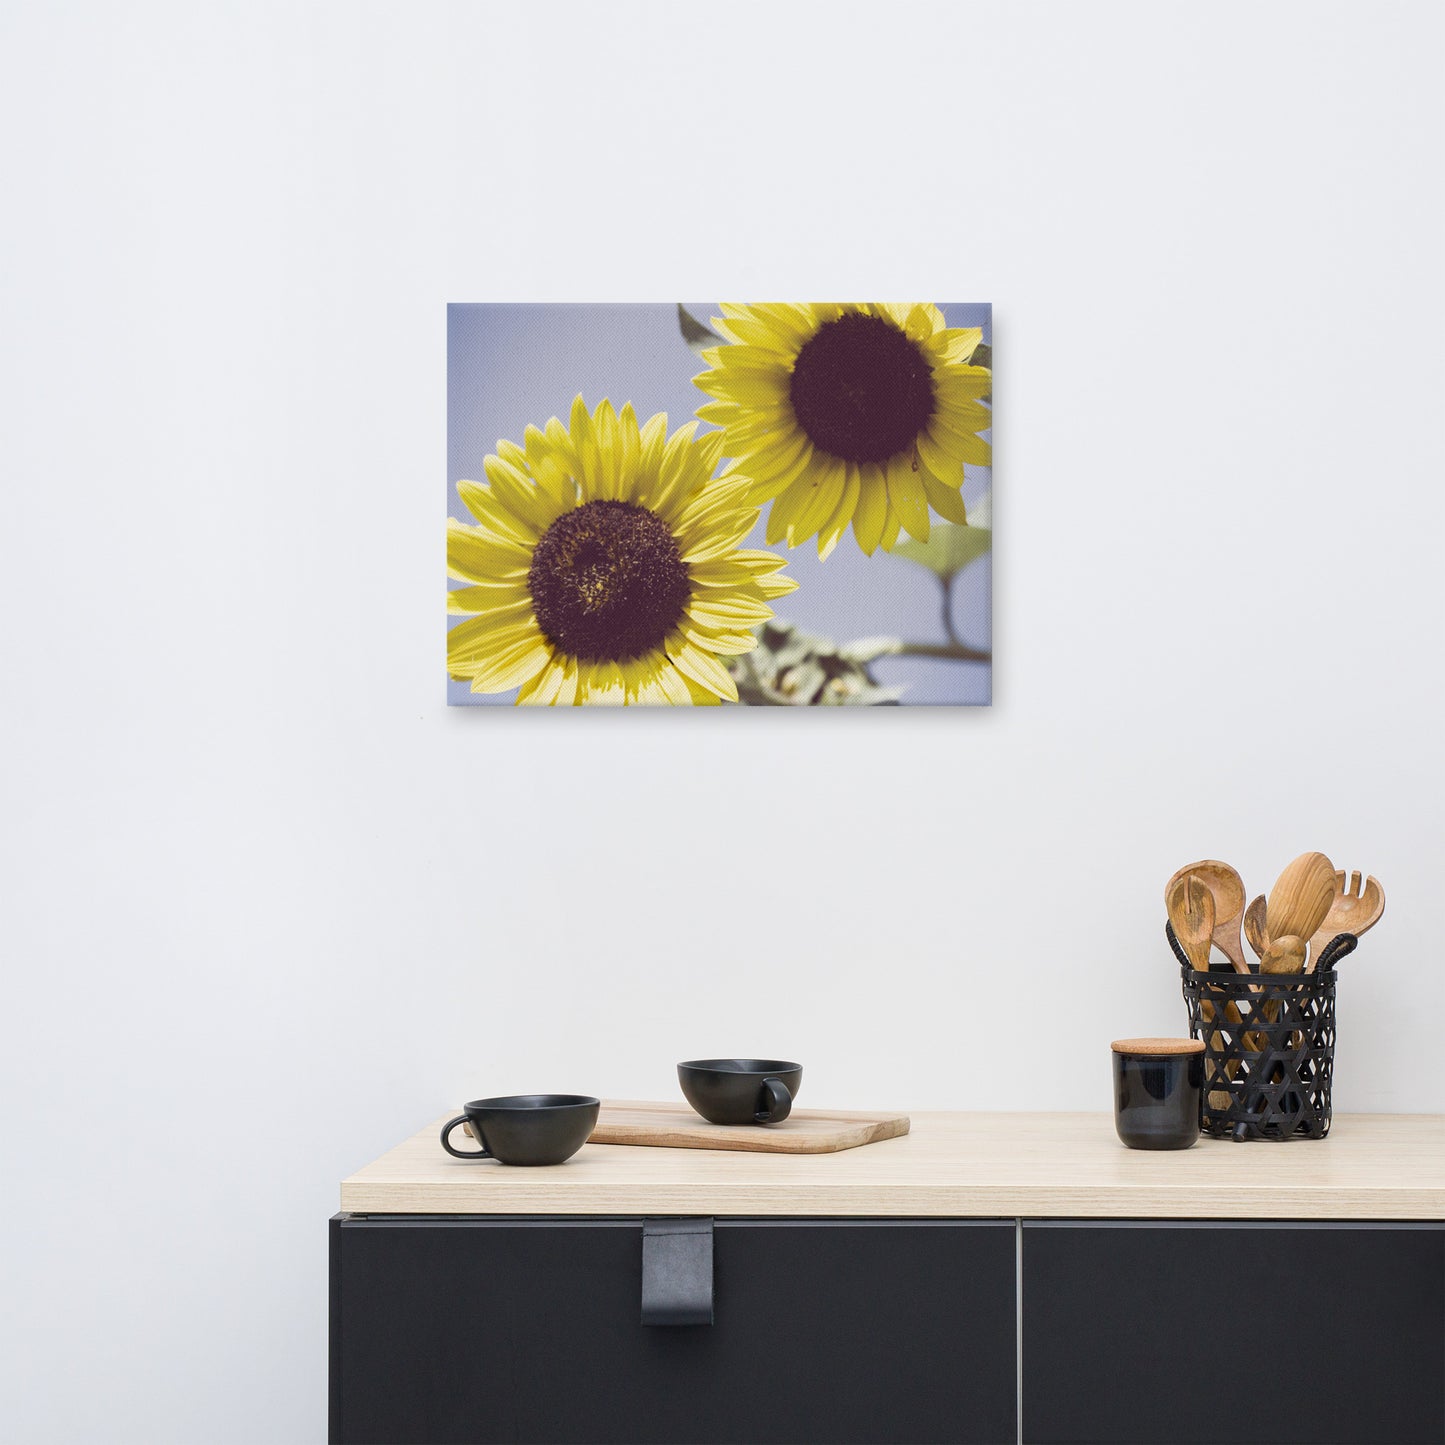 Canvas Pictures Flowers: Aged Sunflowers Against Sky - Rustic / Minimal Botanical / Floral / Flora / Flowers Nature Photograph Canvas Wall Art Print - Artwork